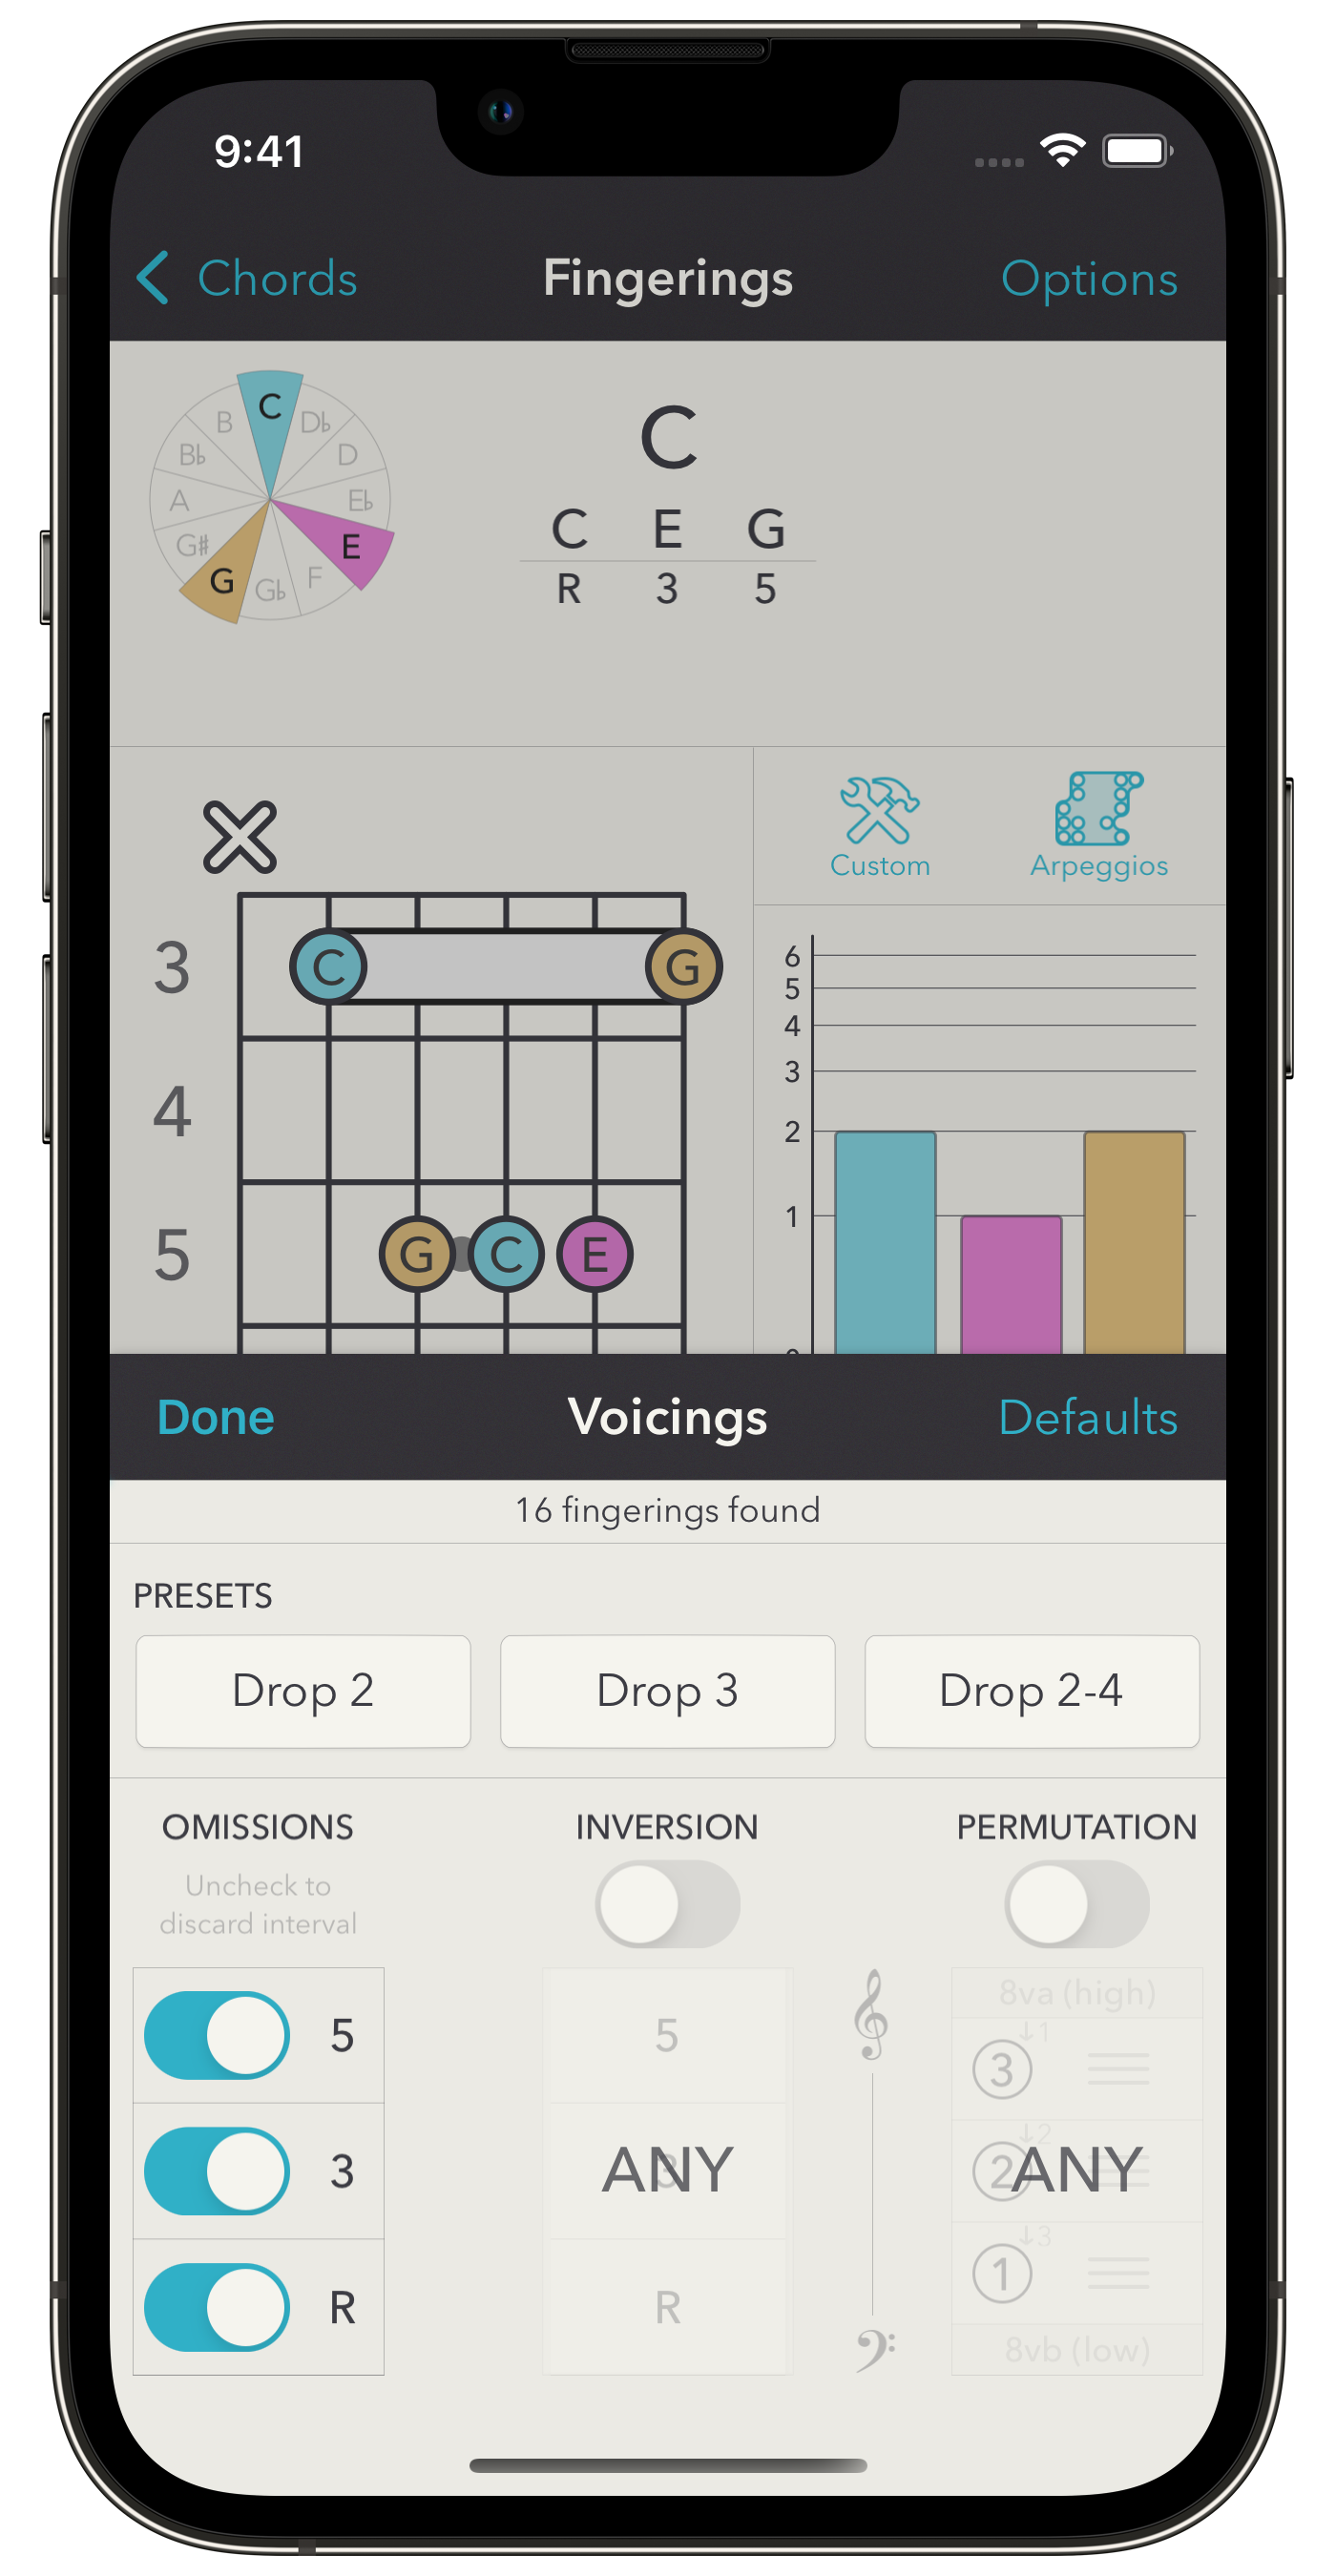 Voicings filtering